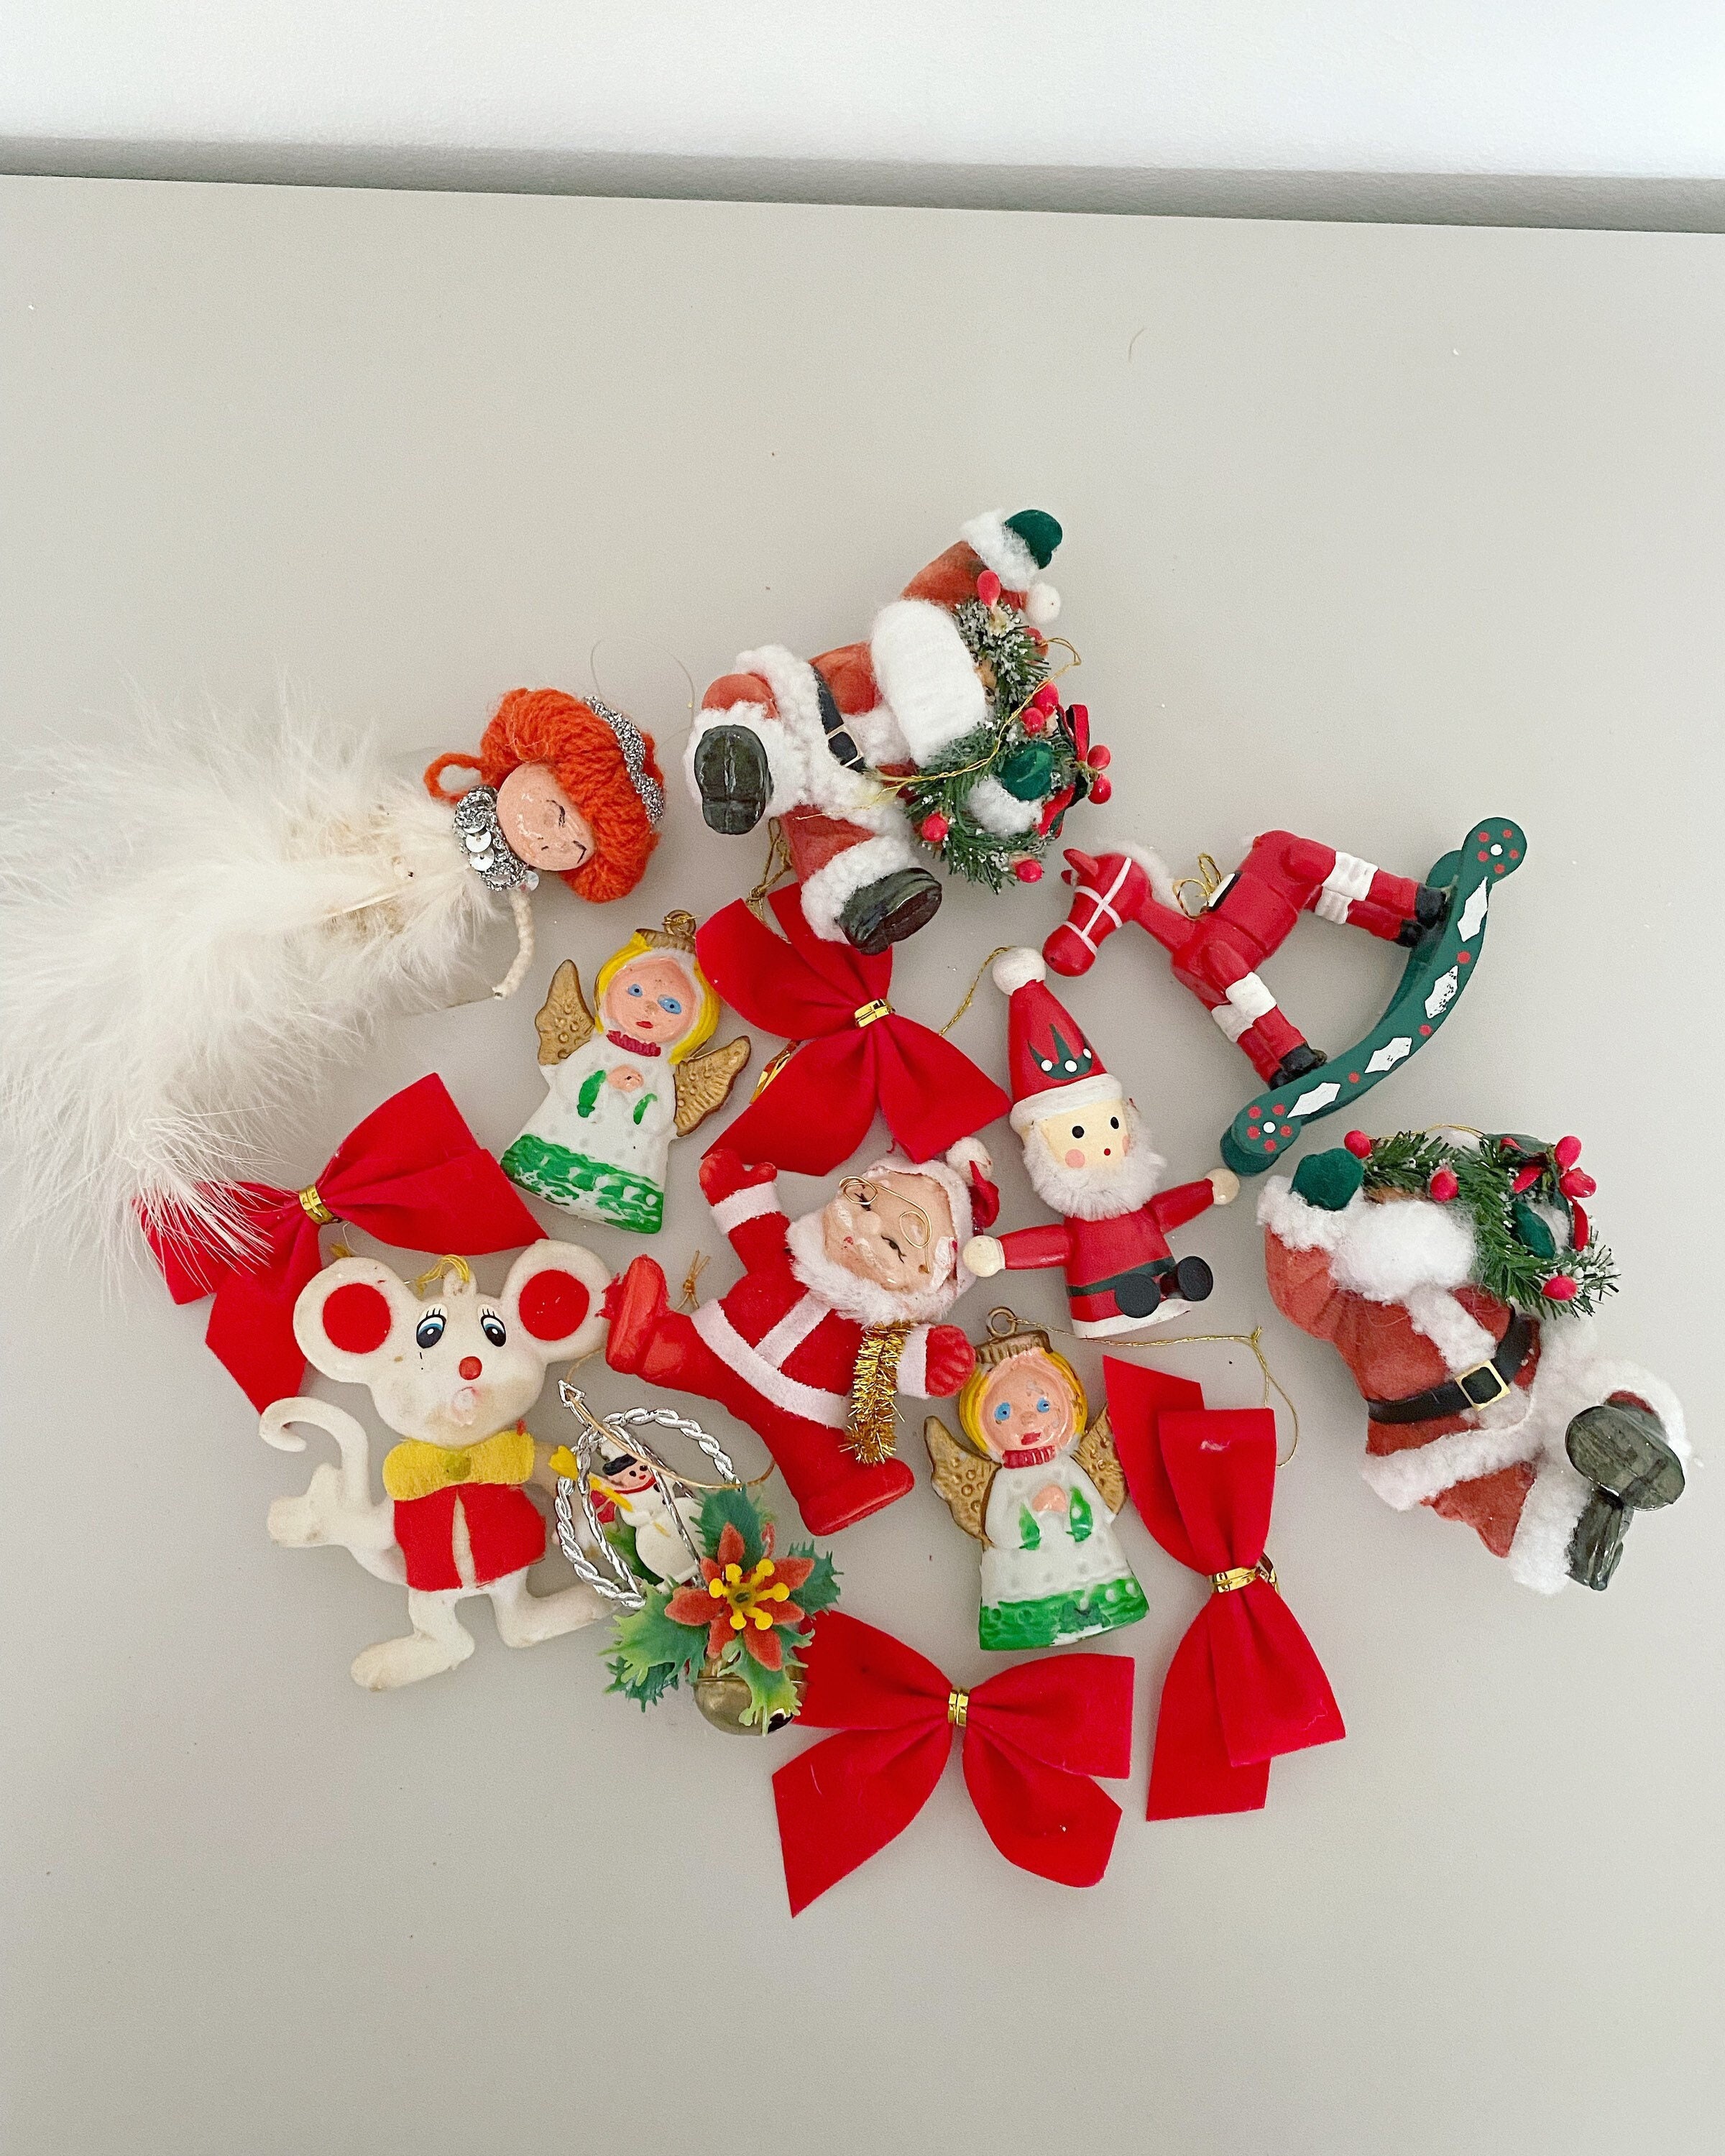 Vintage Christmas Decorations Kitsch and Cute Ornaments - Etsy UK